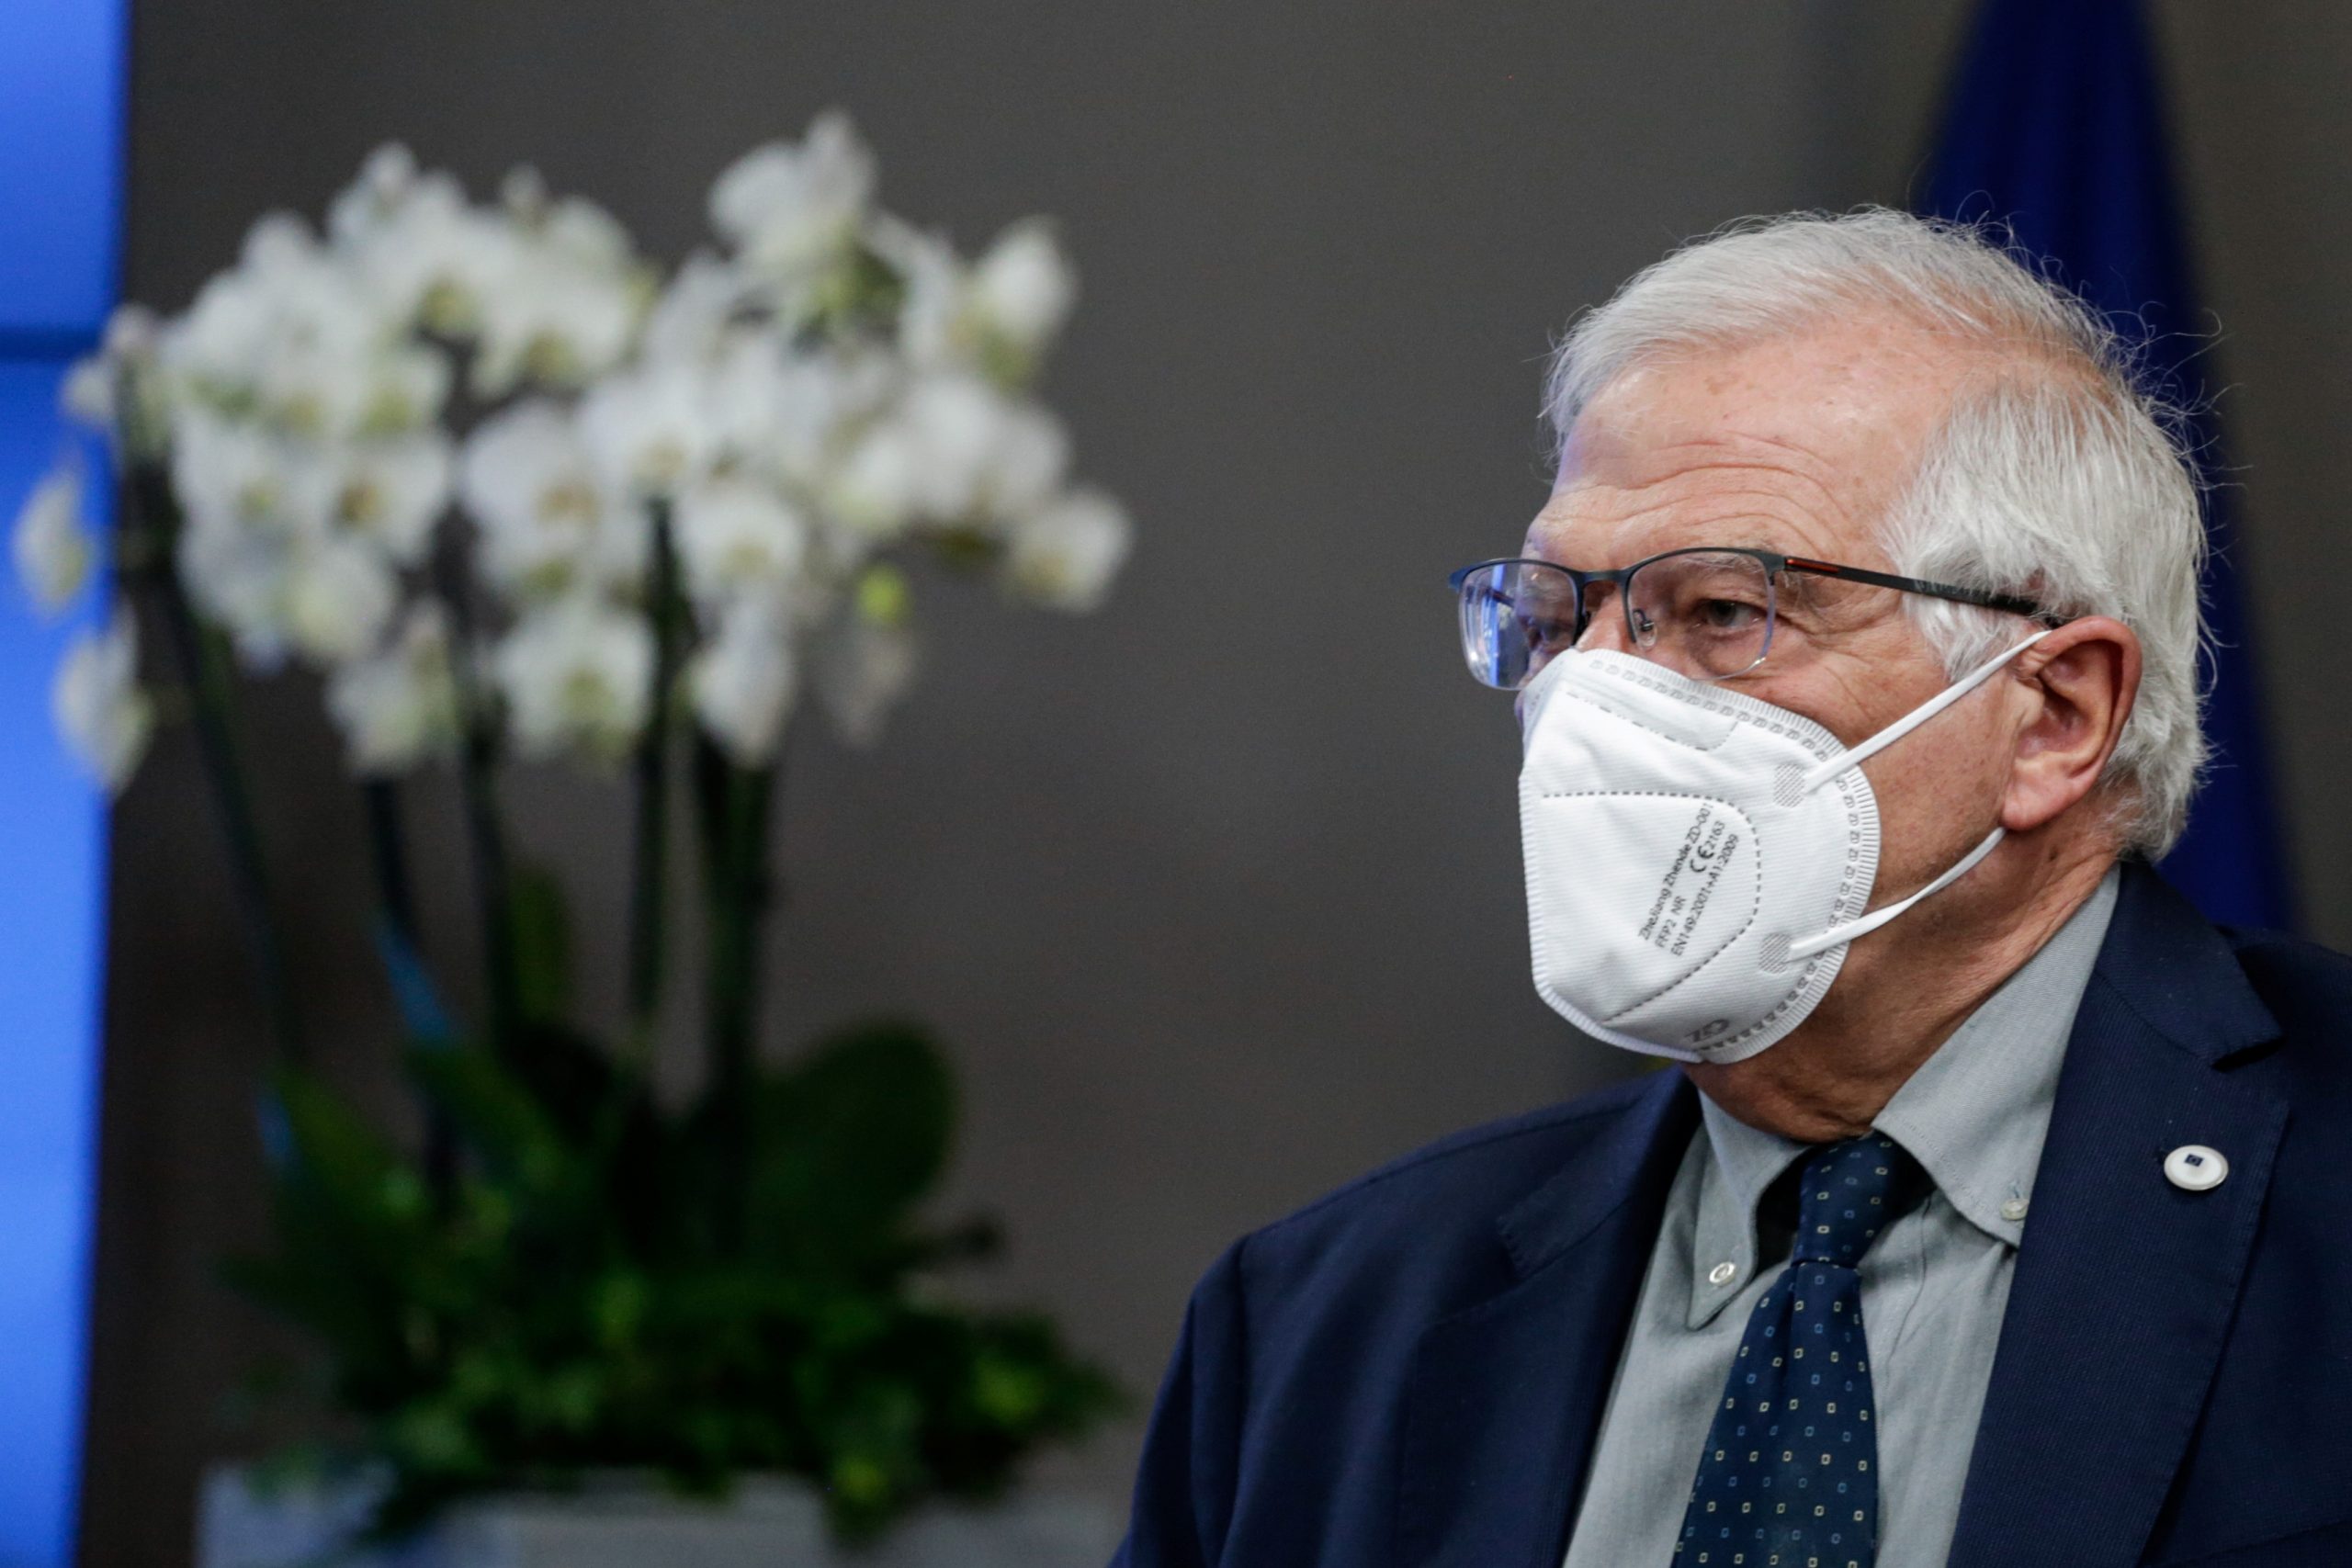 European Union leaders meeting in Brussels European High Representative of the Union for Foreign Affairs Josep Borrell leaves after the first day of a European Union leaders meeting in Brussels, Belgium June 25, 2021. Aris Oikonomou/Pool via REUTERS POOL